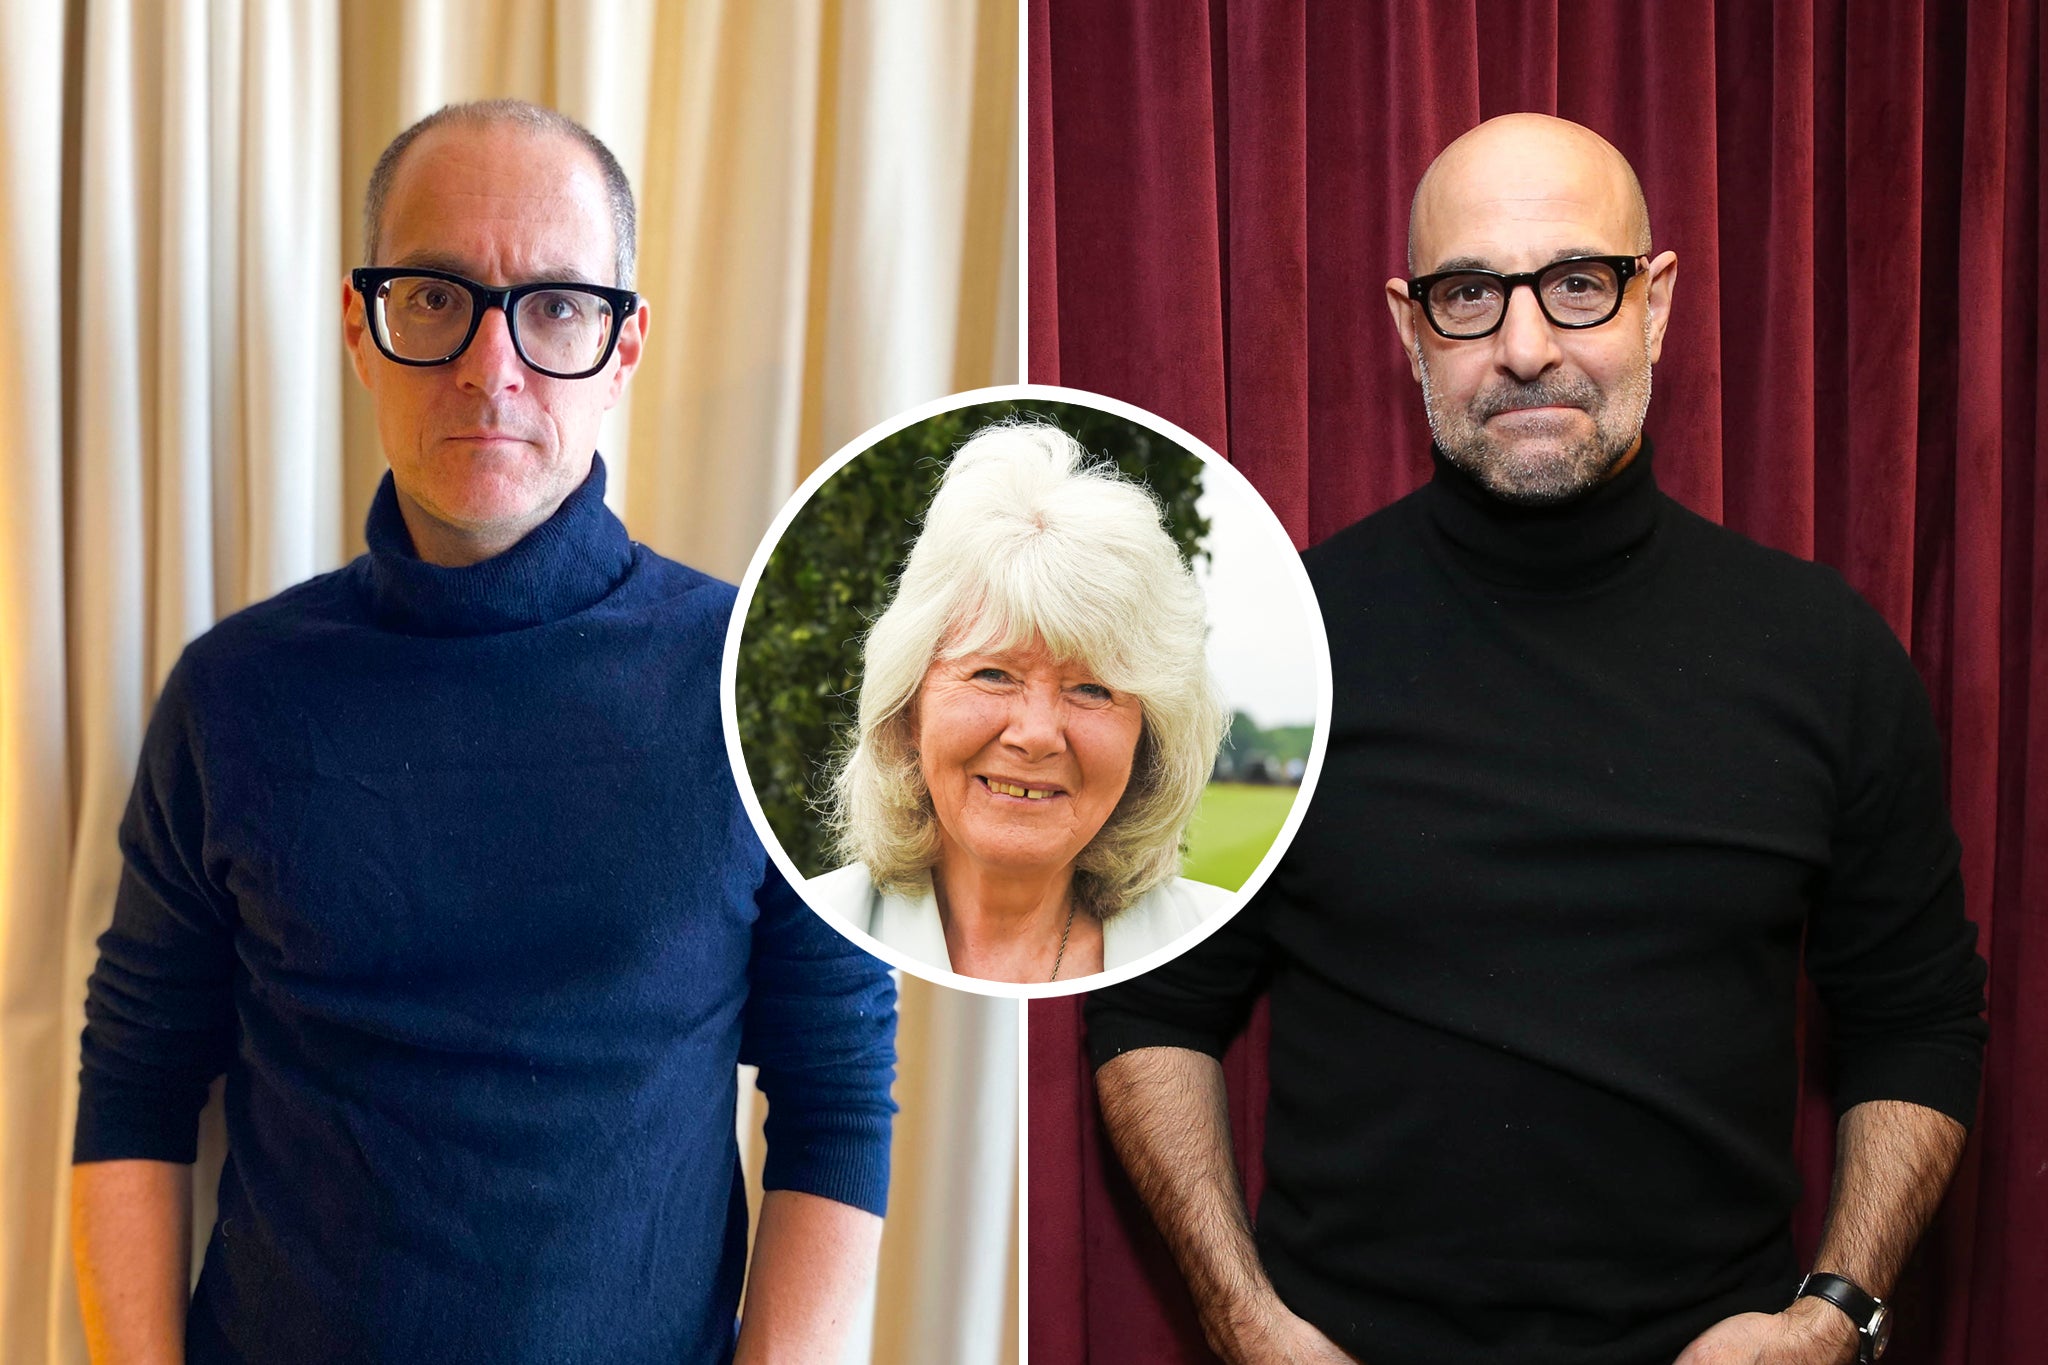 Author Jilly Cooper, centre, has bemoaned the masculinity of modern men such as Stanley Tucci, right. In the case for the defence, Tucci lookalike Harry Wallop begs to differ